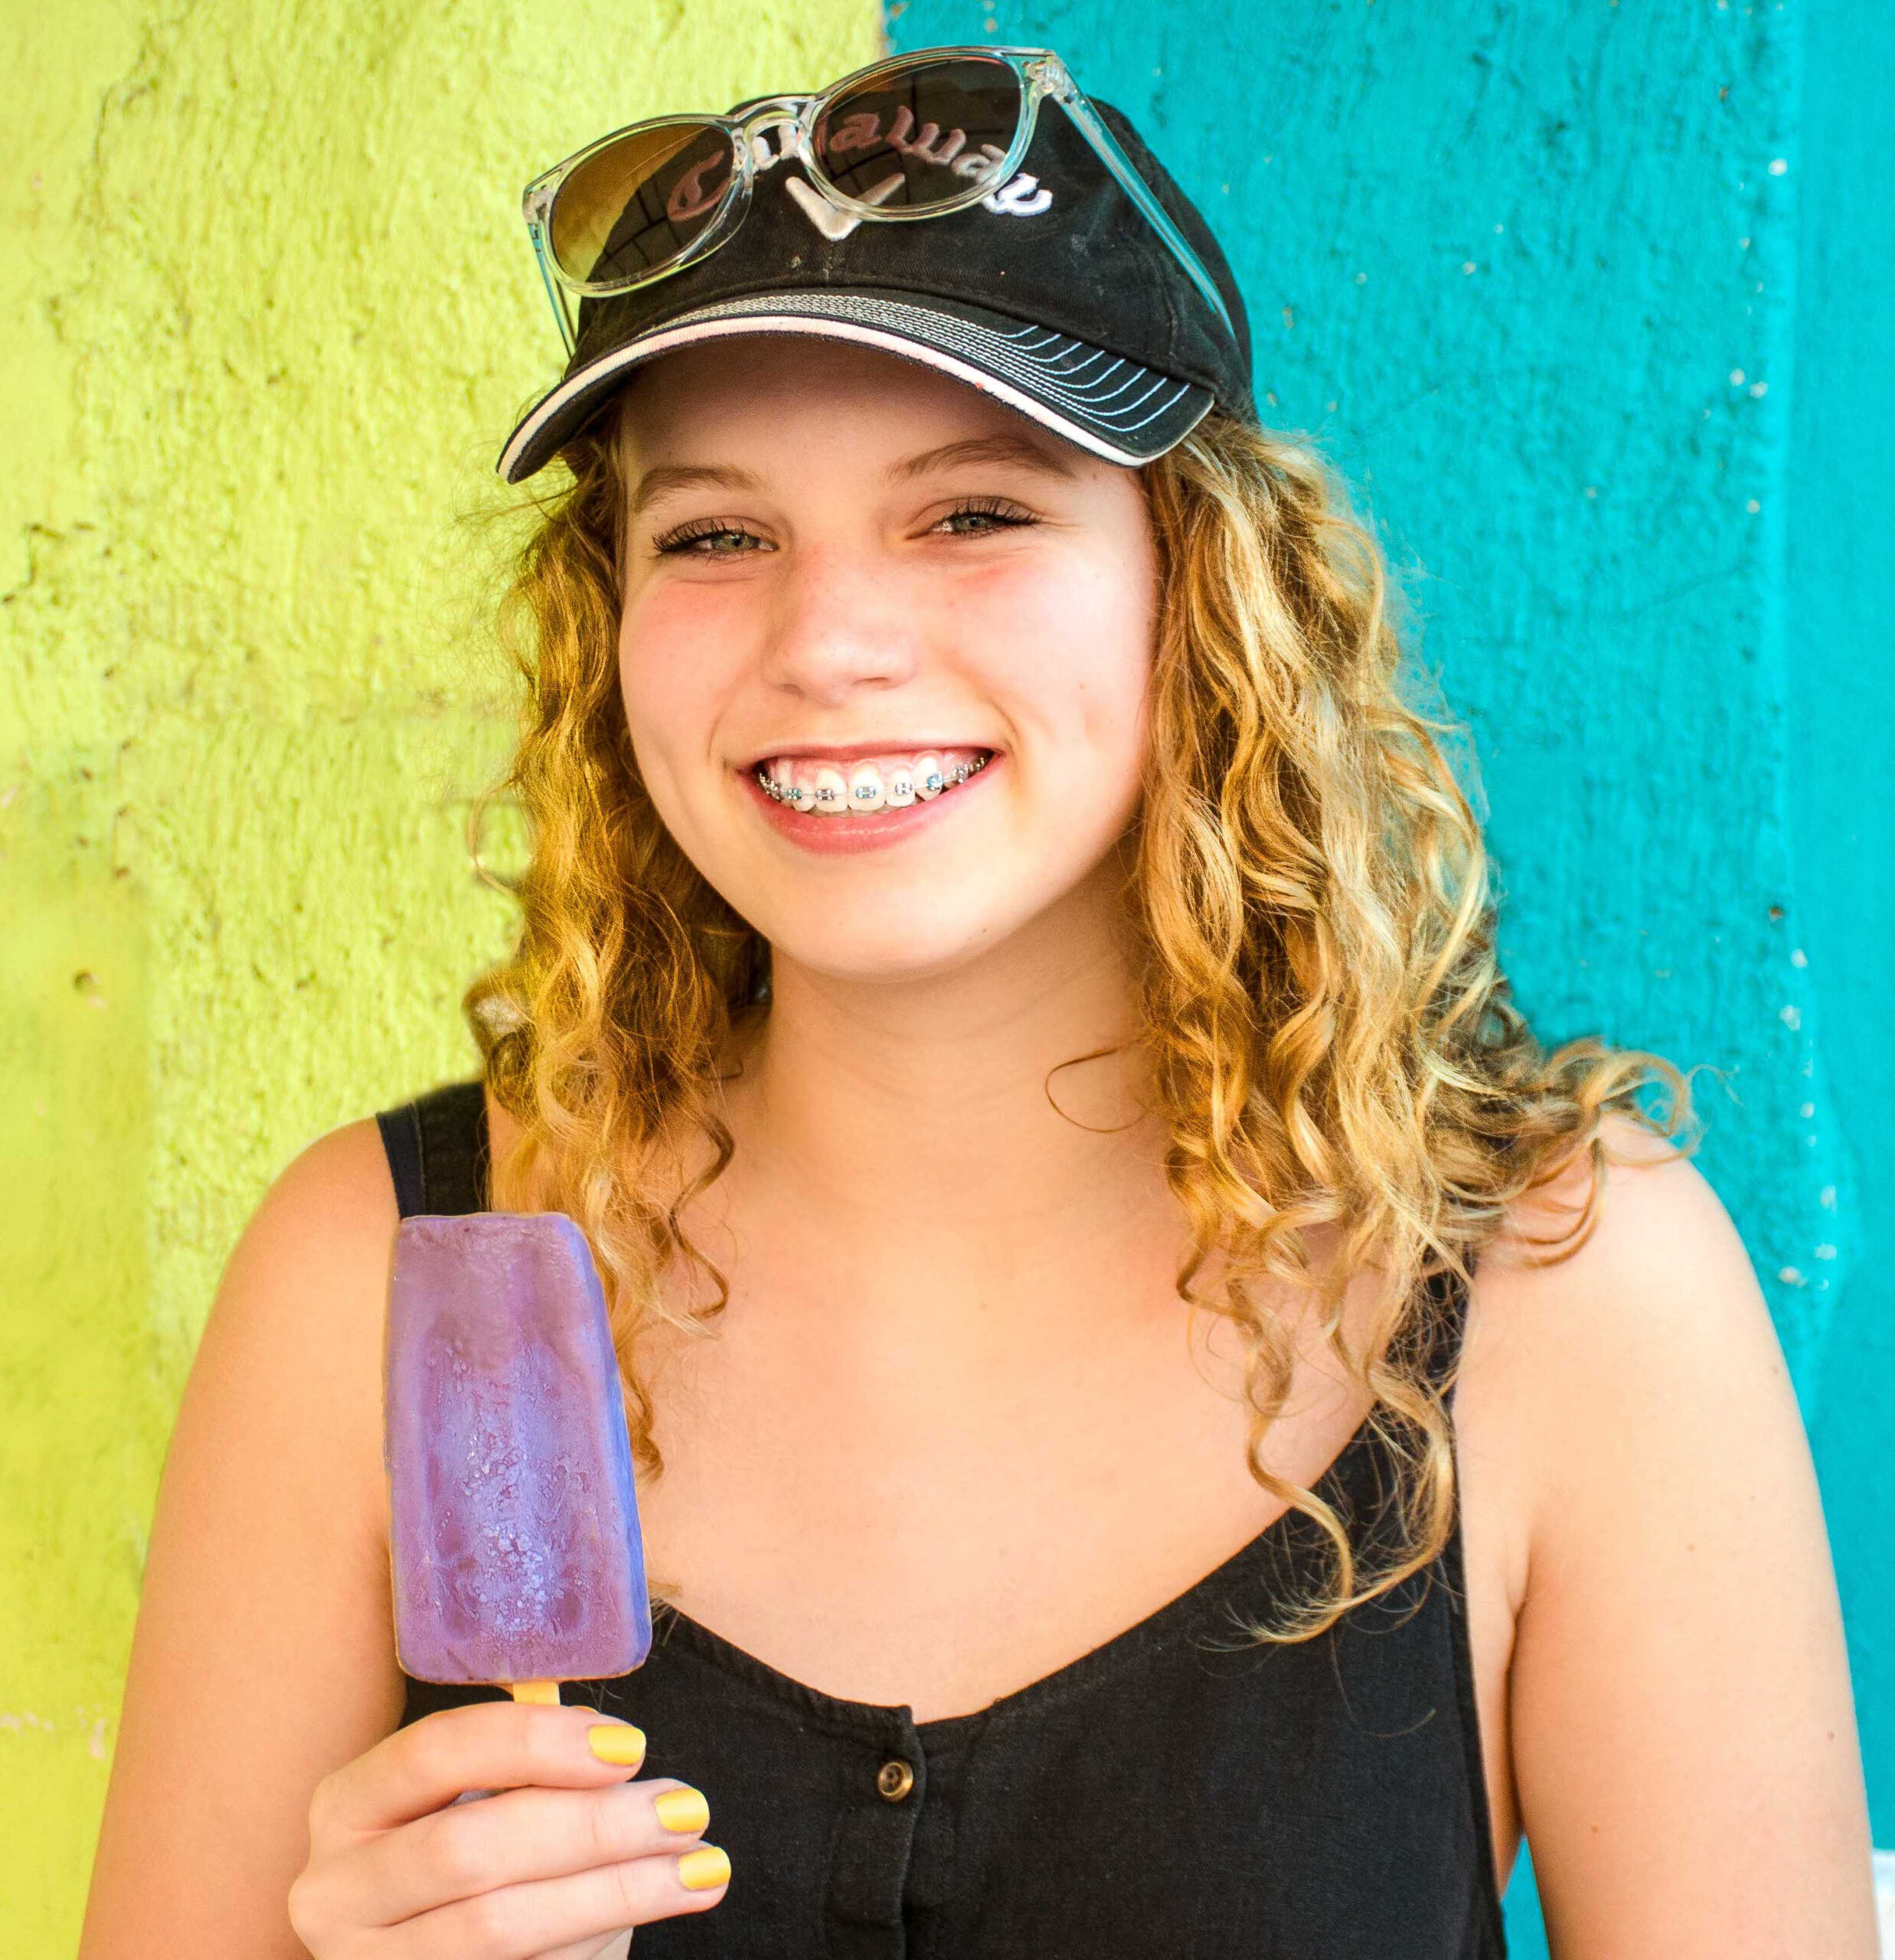 teenager with braces and a popsicle